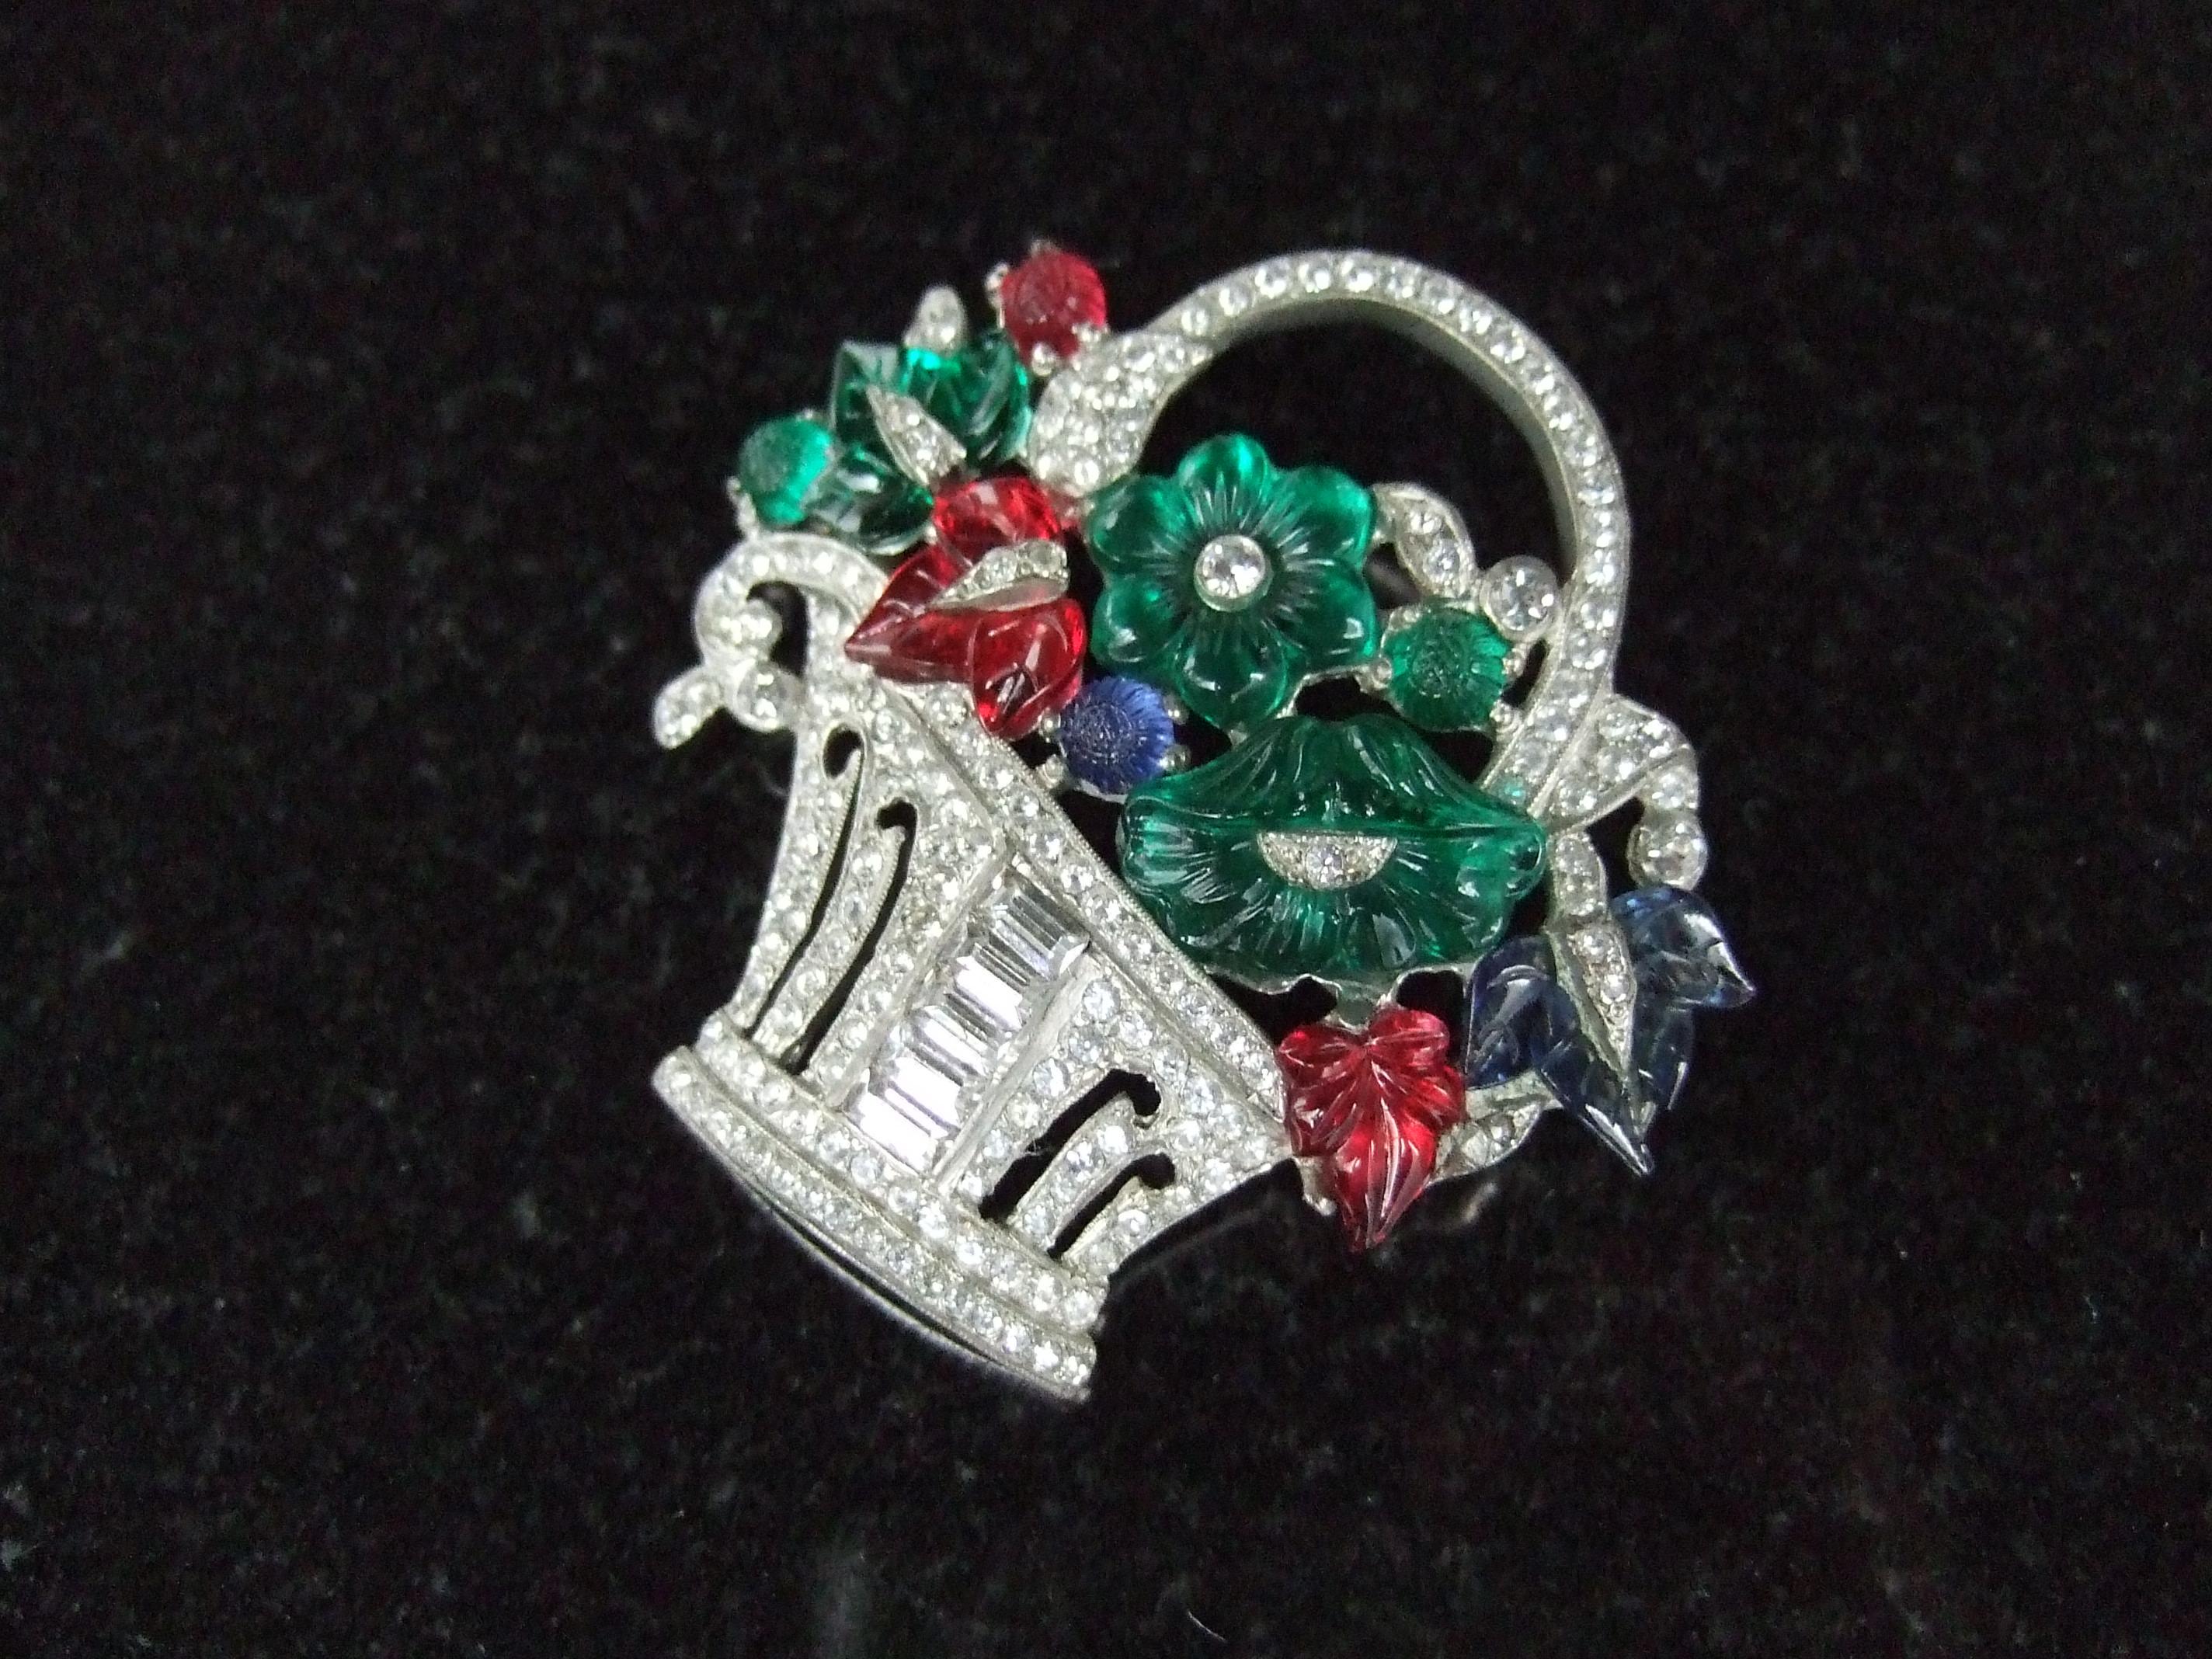 Trifari Art Deco Carved Glass Fruit Salad Flower Basket Brooch c 1930s In Good Condition For Sale In University City, MO